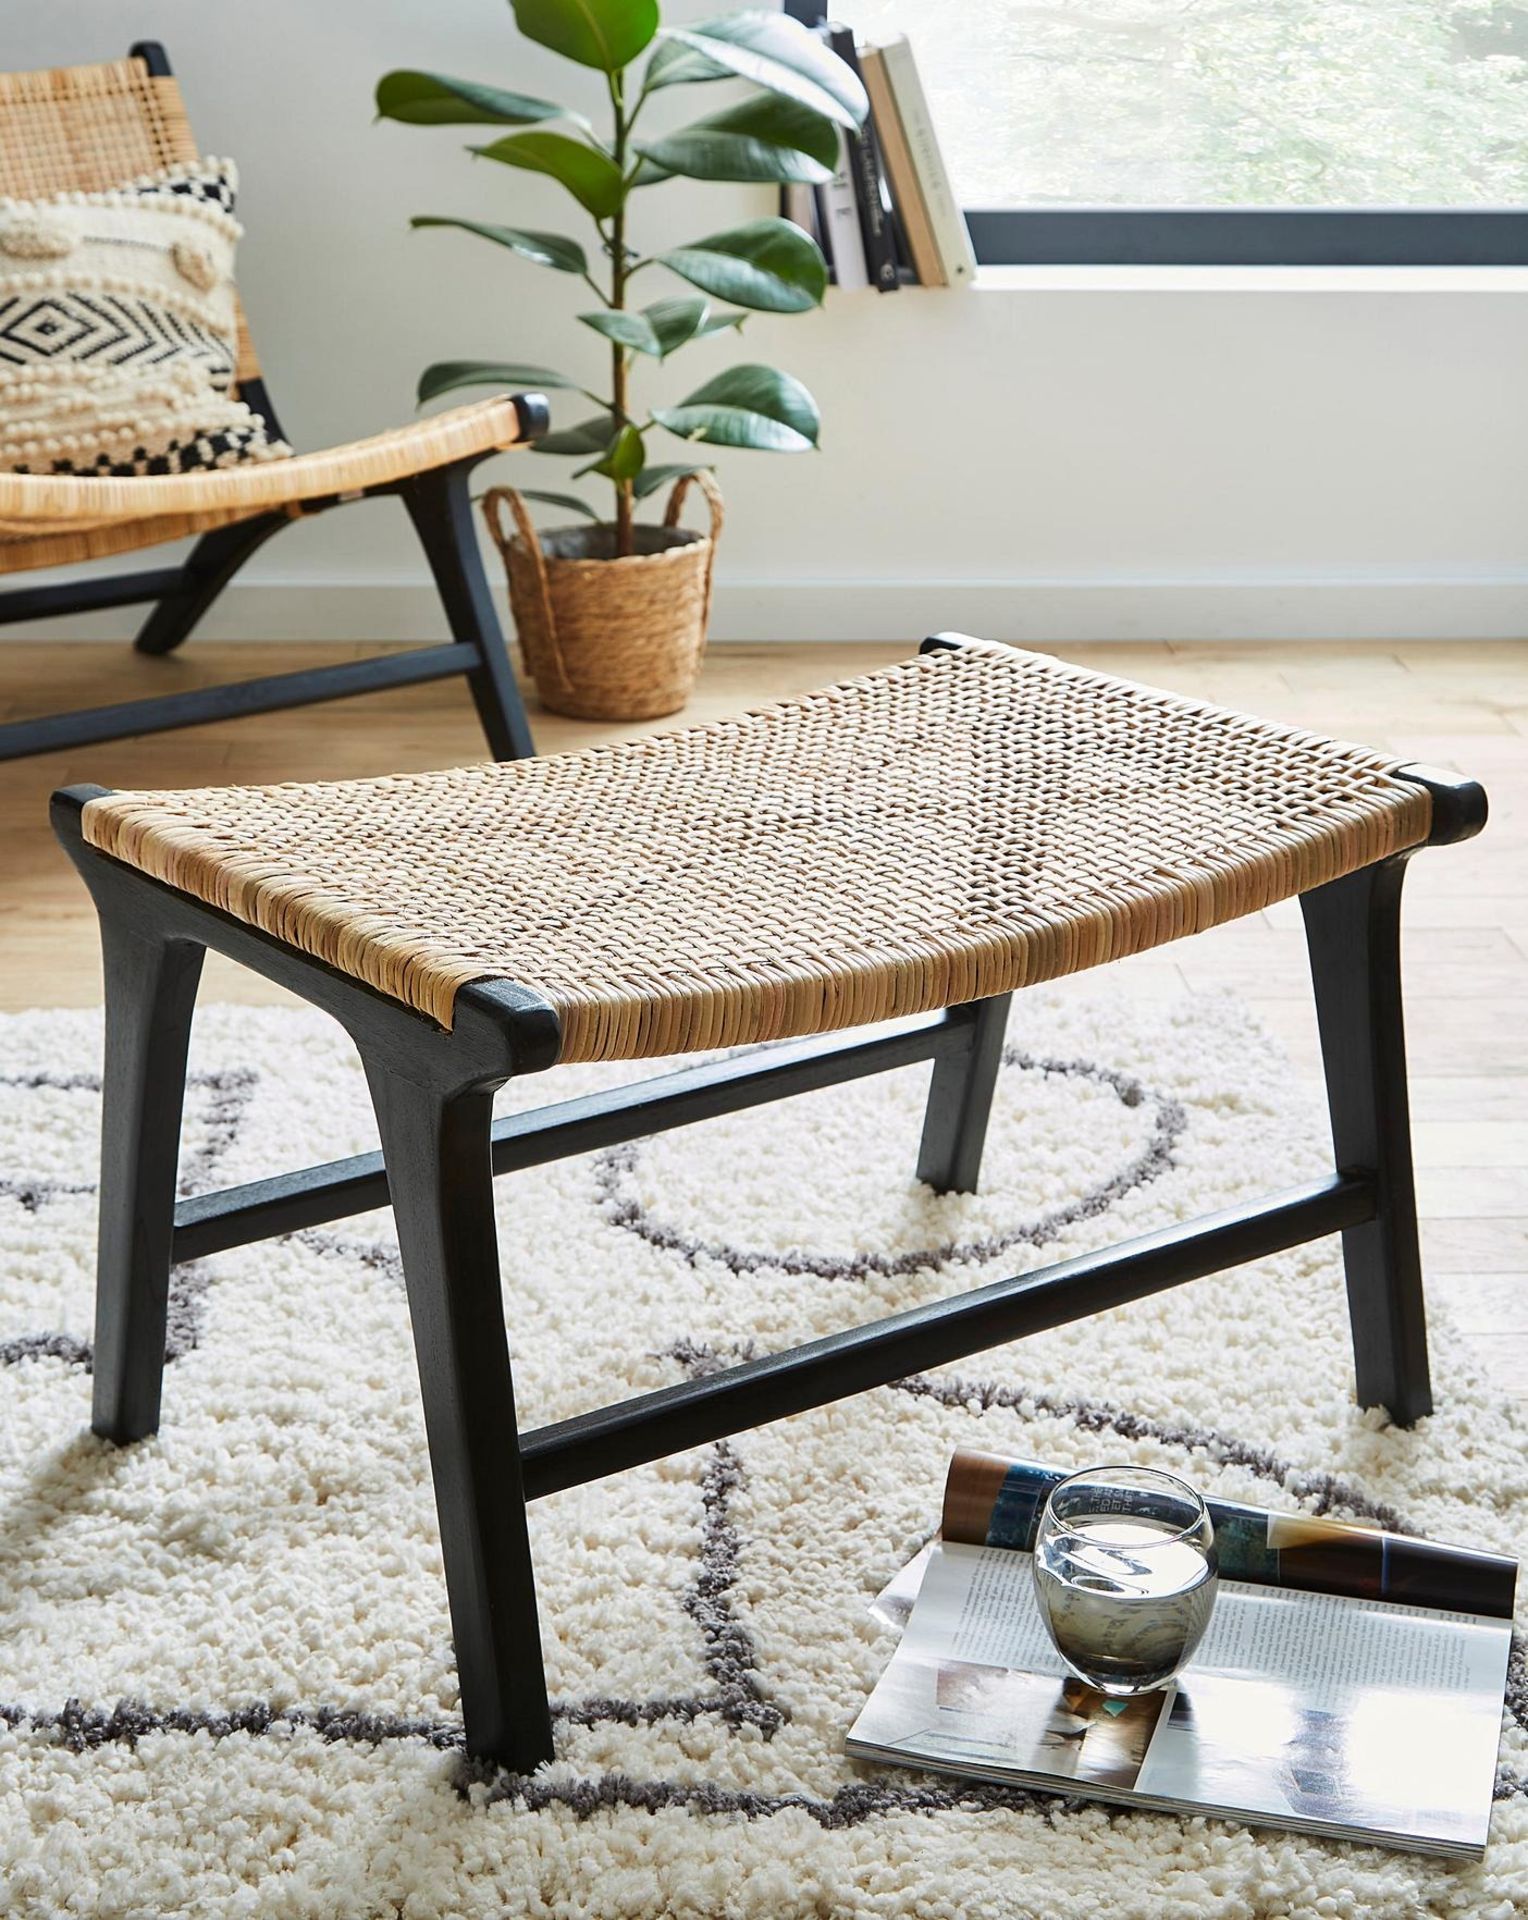 Willow Rattan Footstool (LOCATION H/S 2.7.2)